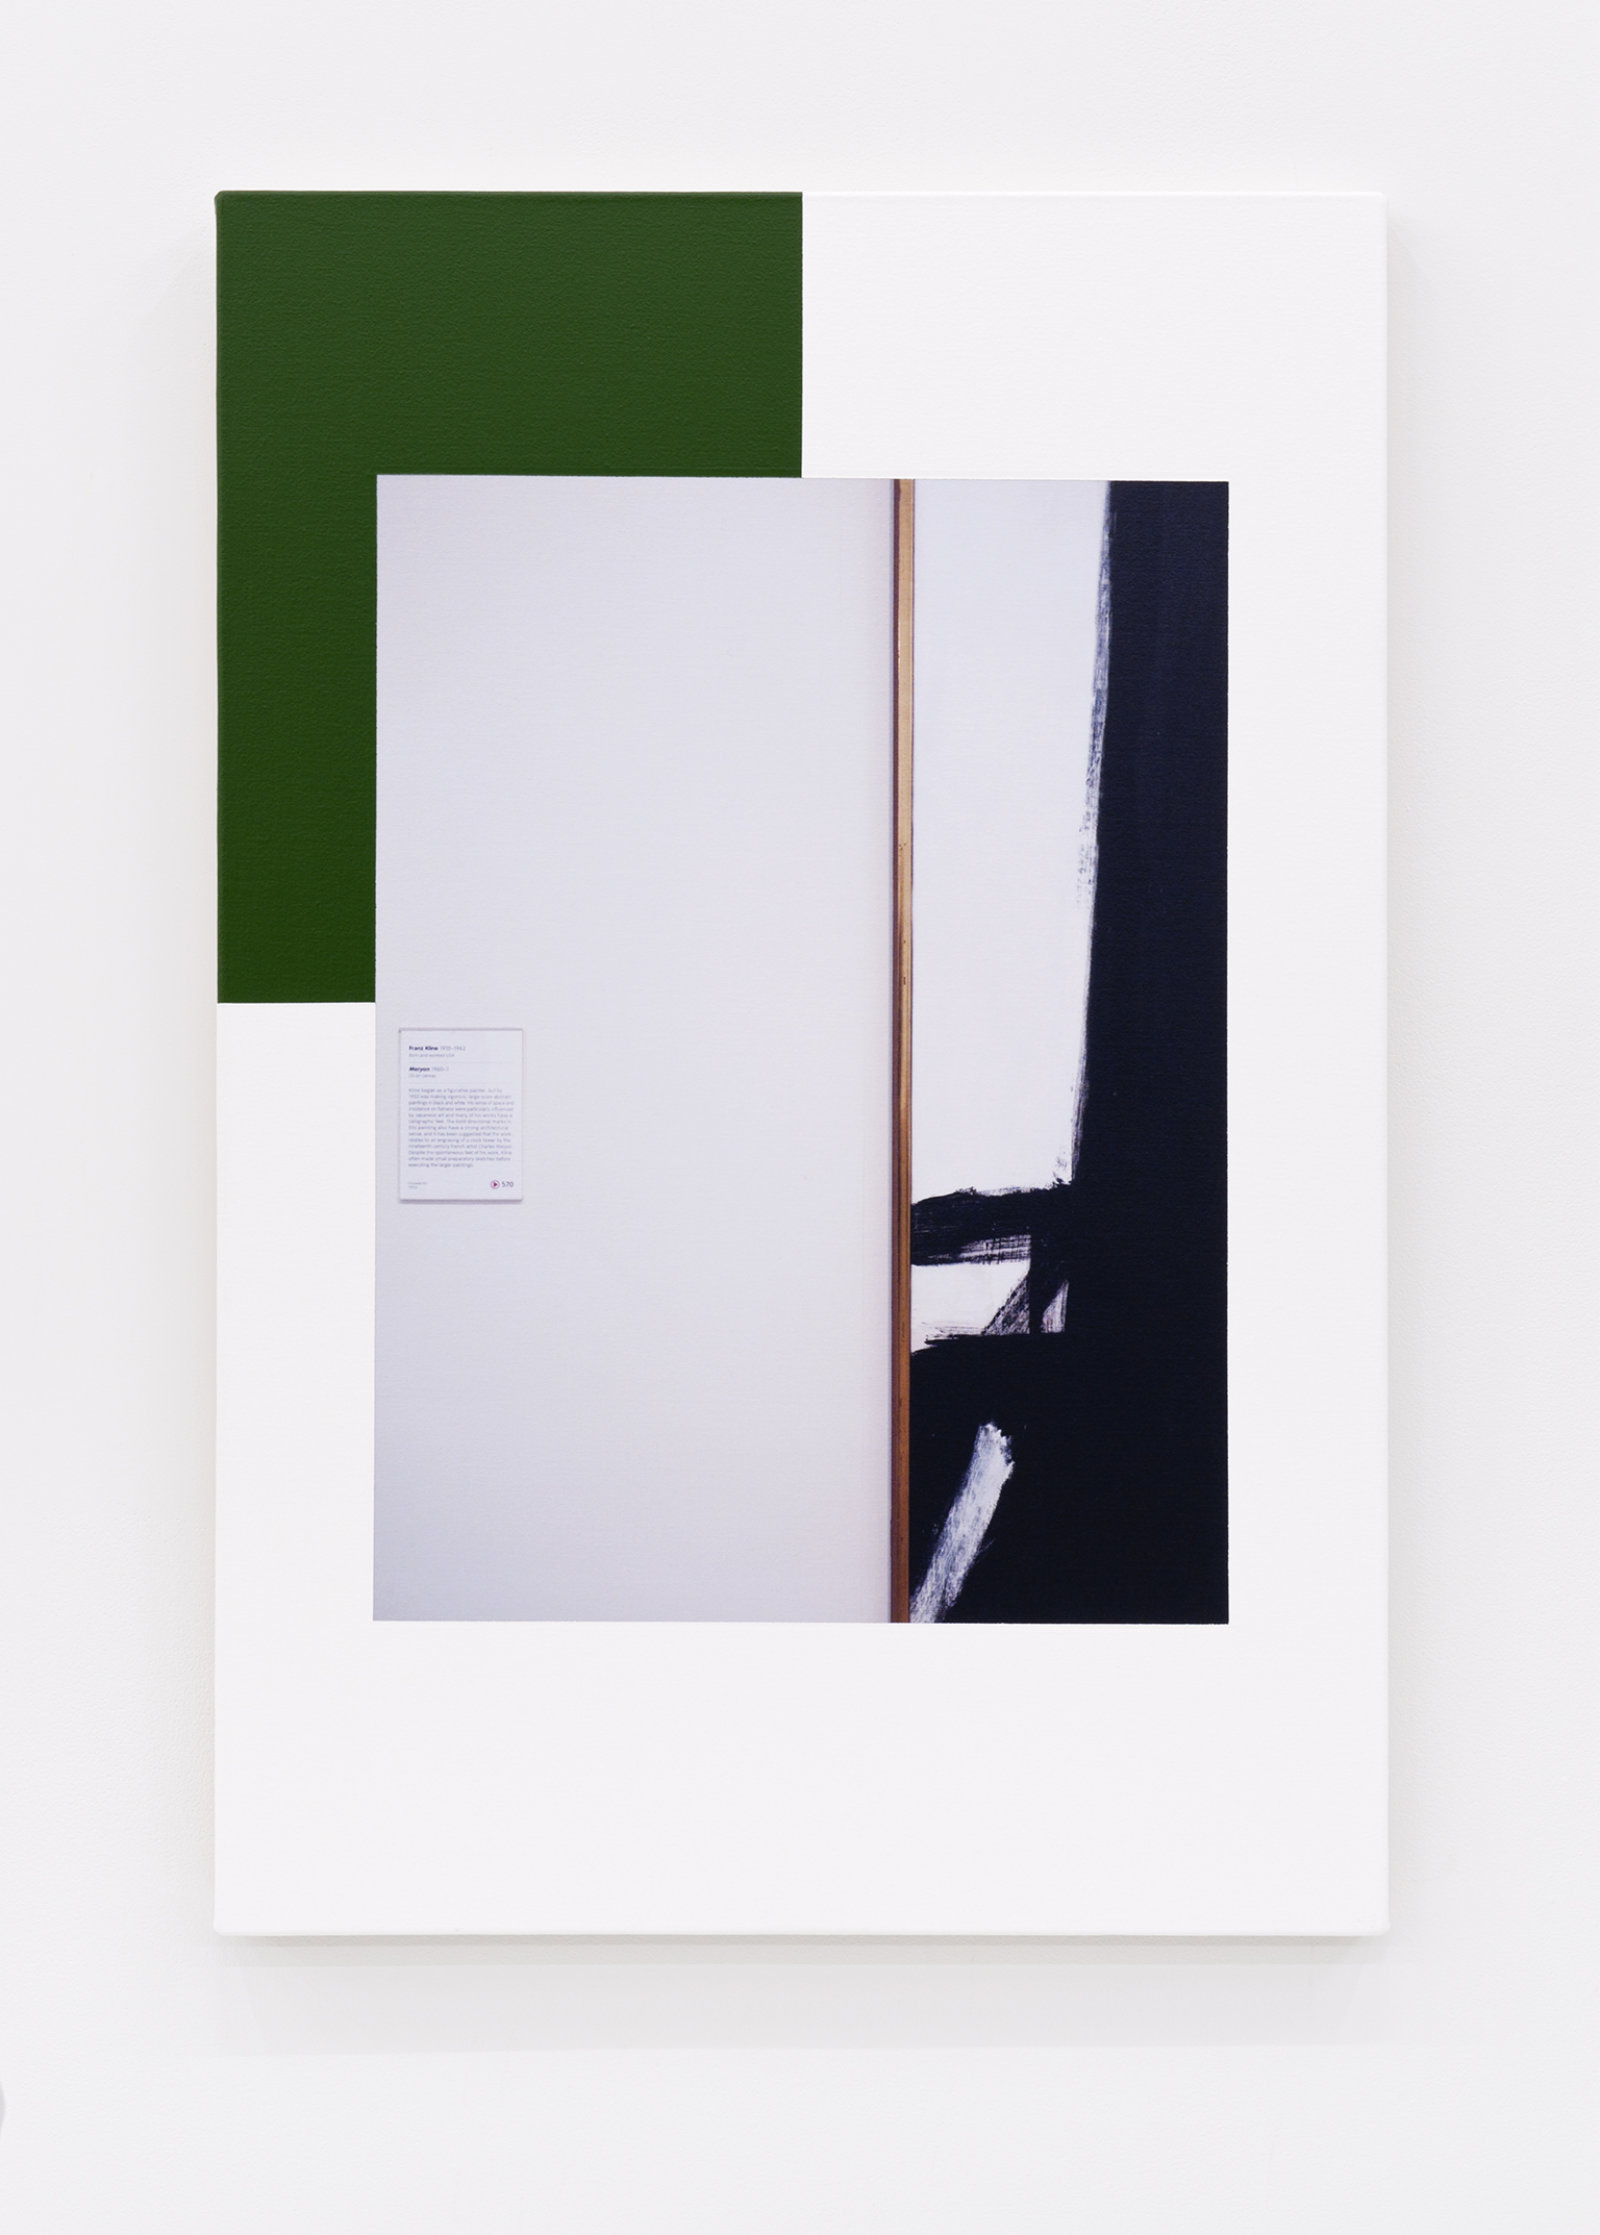 Ian Wallace, Abstract Composition (with Franz Kline), 2012, photolaminate with acrylic on canvas, 36 x 24 in. (91 x 61 cm)